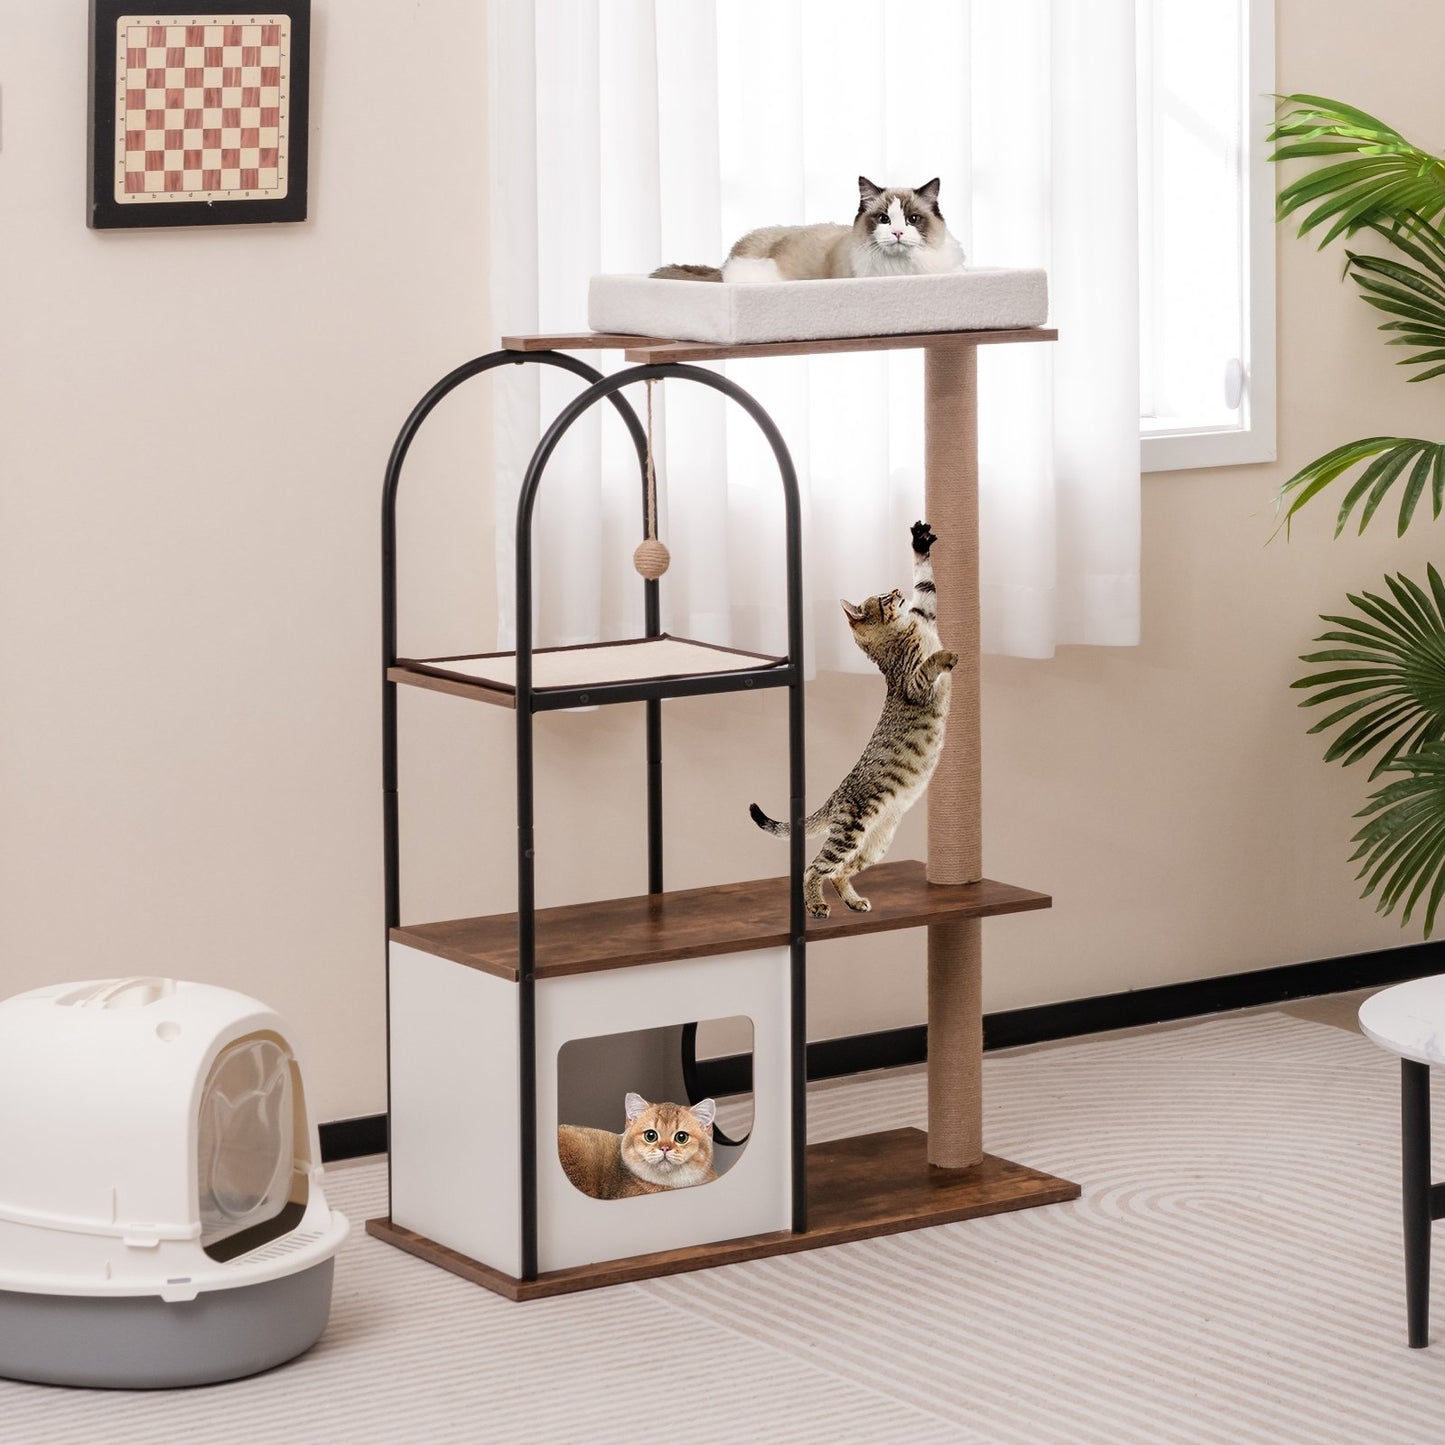 47 Inch Tall Cat Tree Tower Top Perch Cat Bed with Metal Frame, White